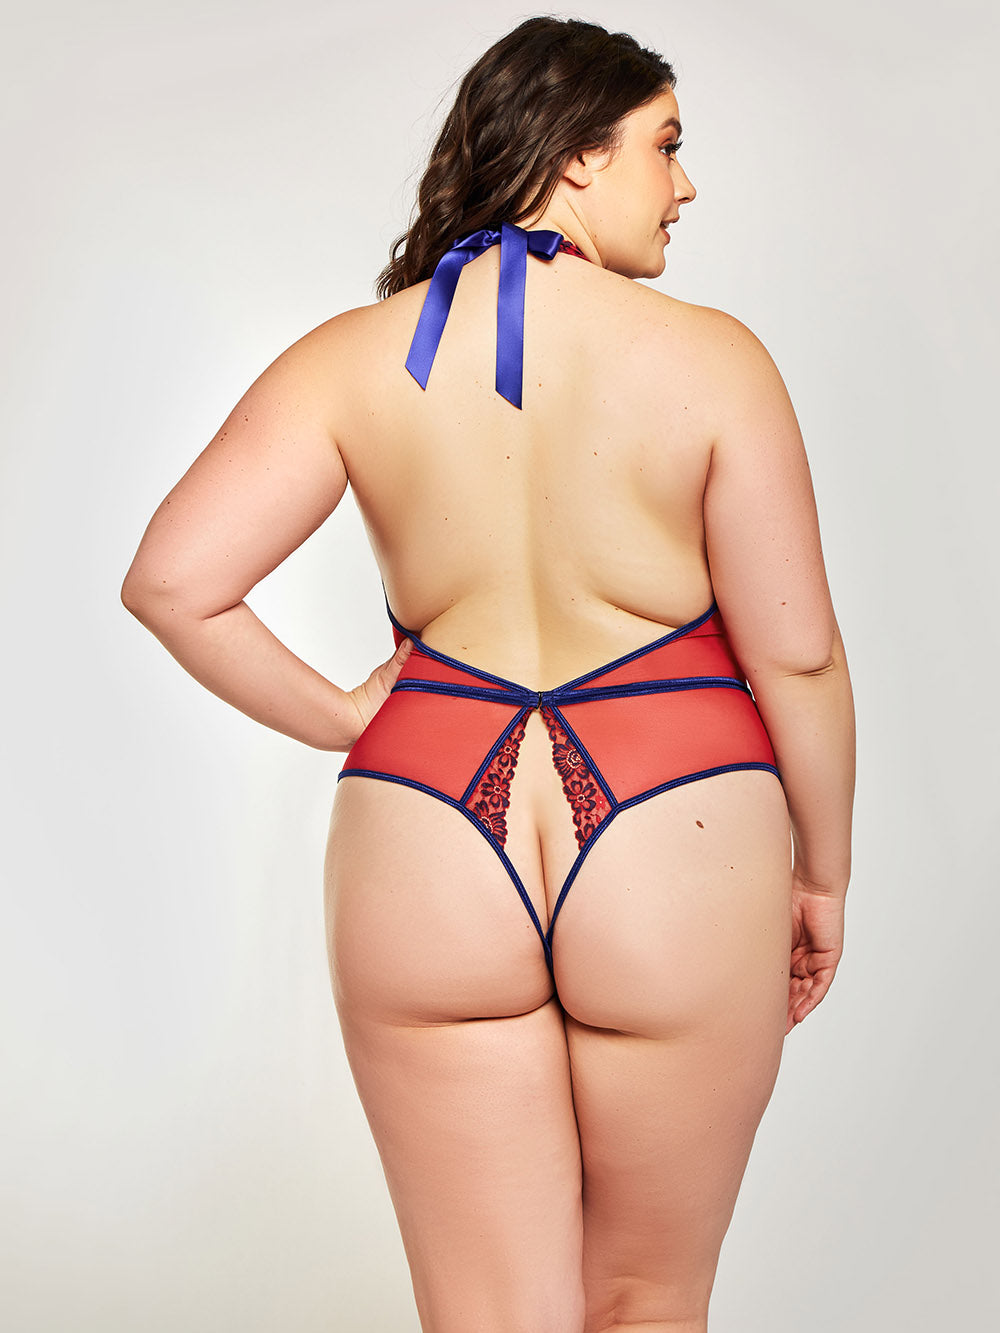 iCollection Plus Size Teddy Lingerie Red / 1X Julia Plus Size Teddy